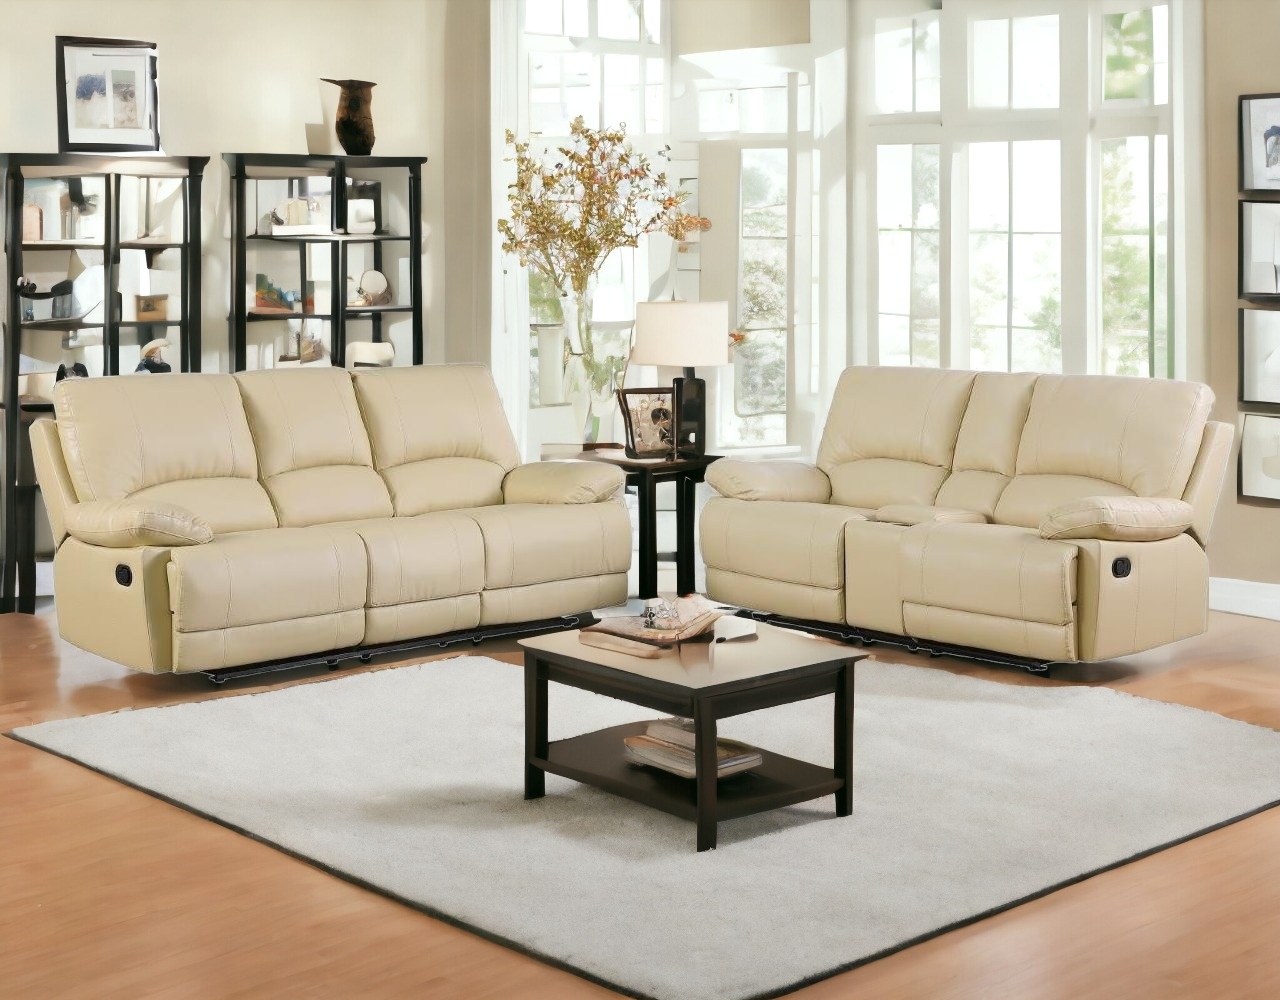 Two Piece Indoor Beige Faux Leather Five Person Seating Set-343975-1